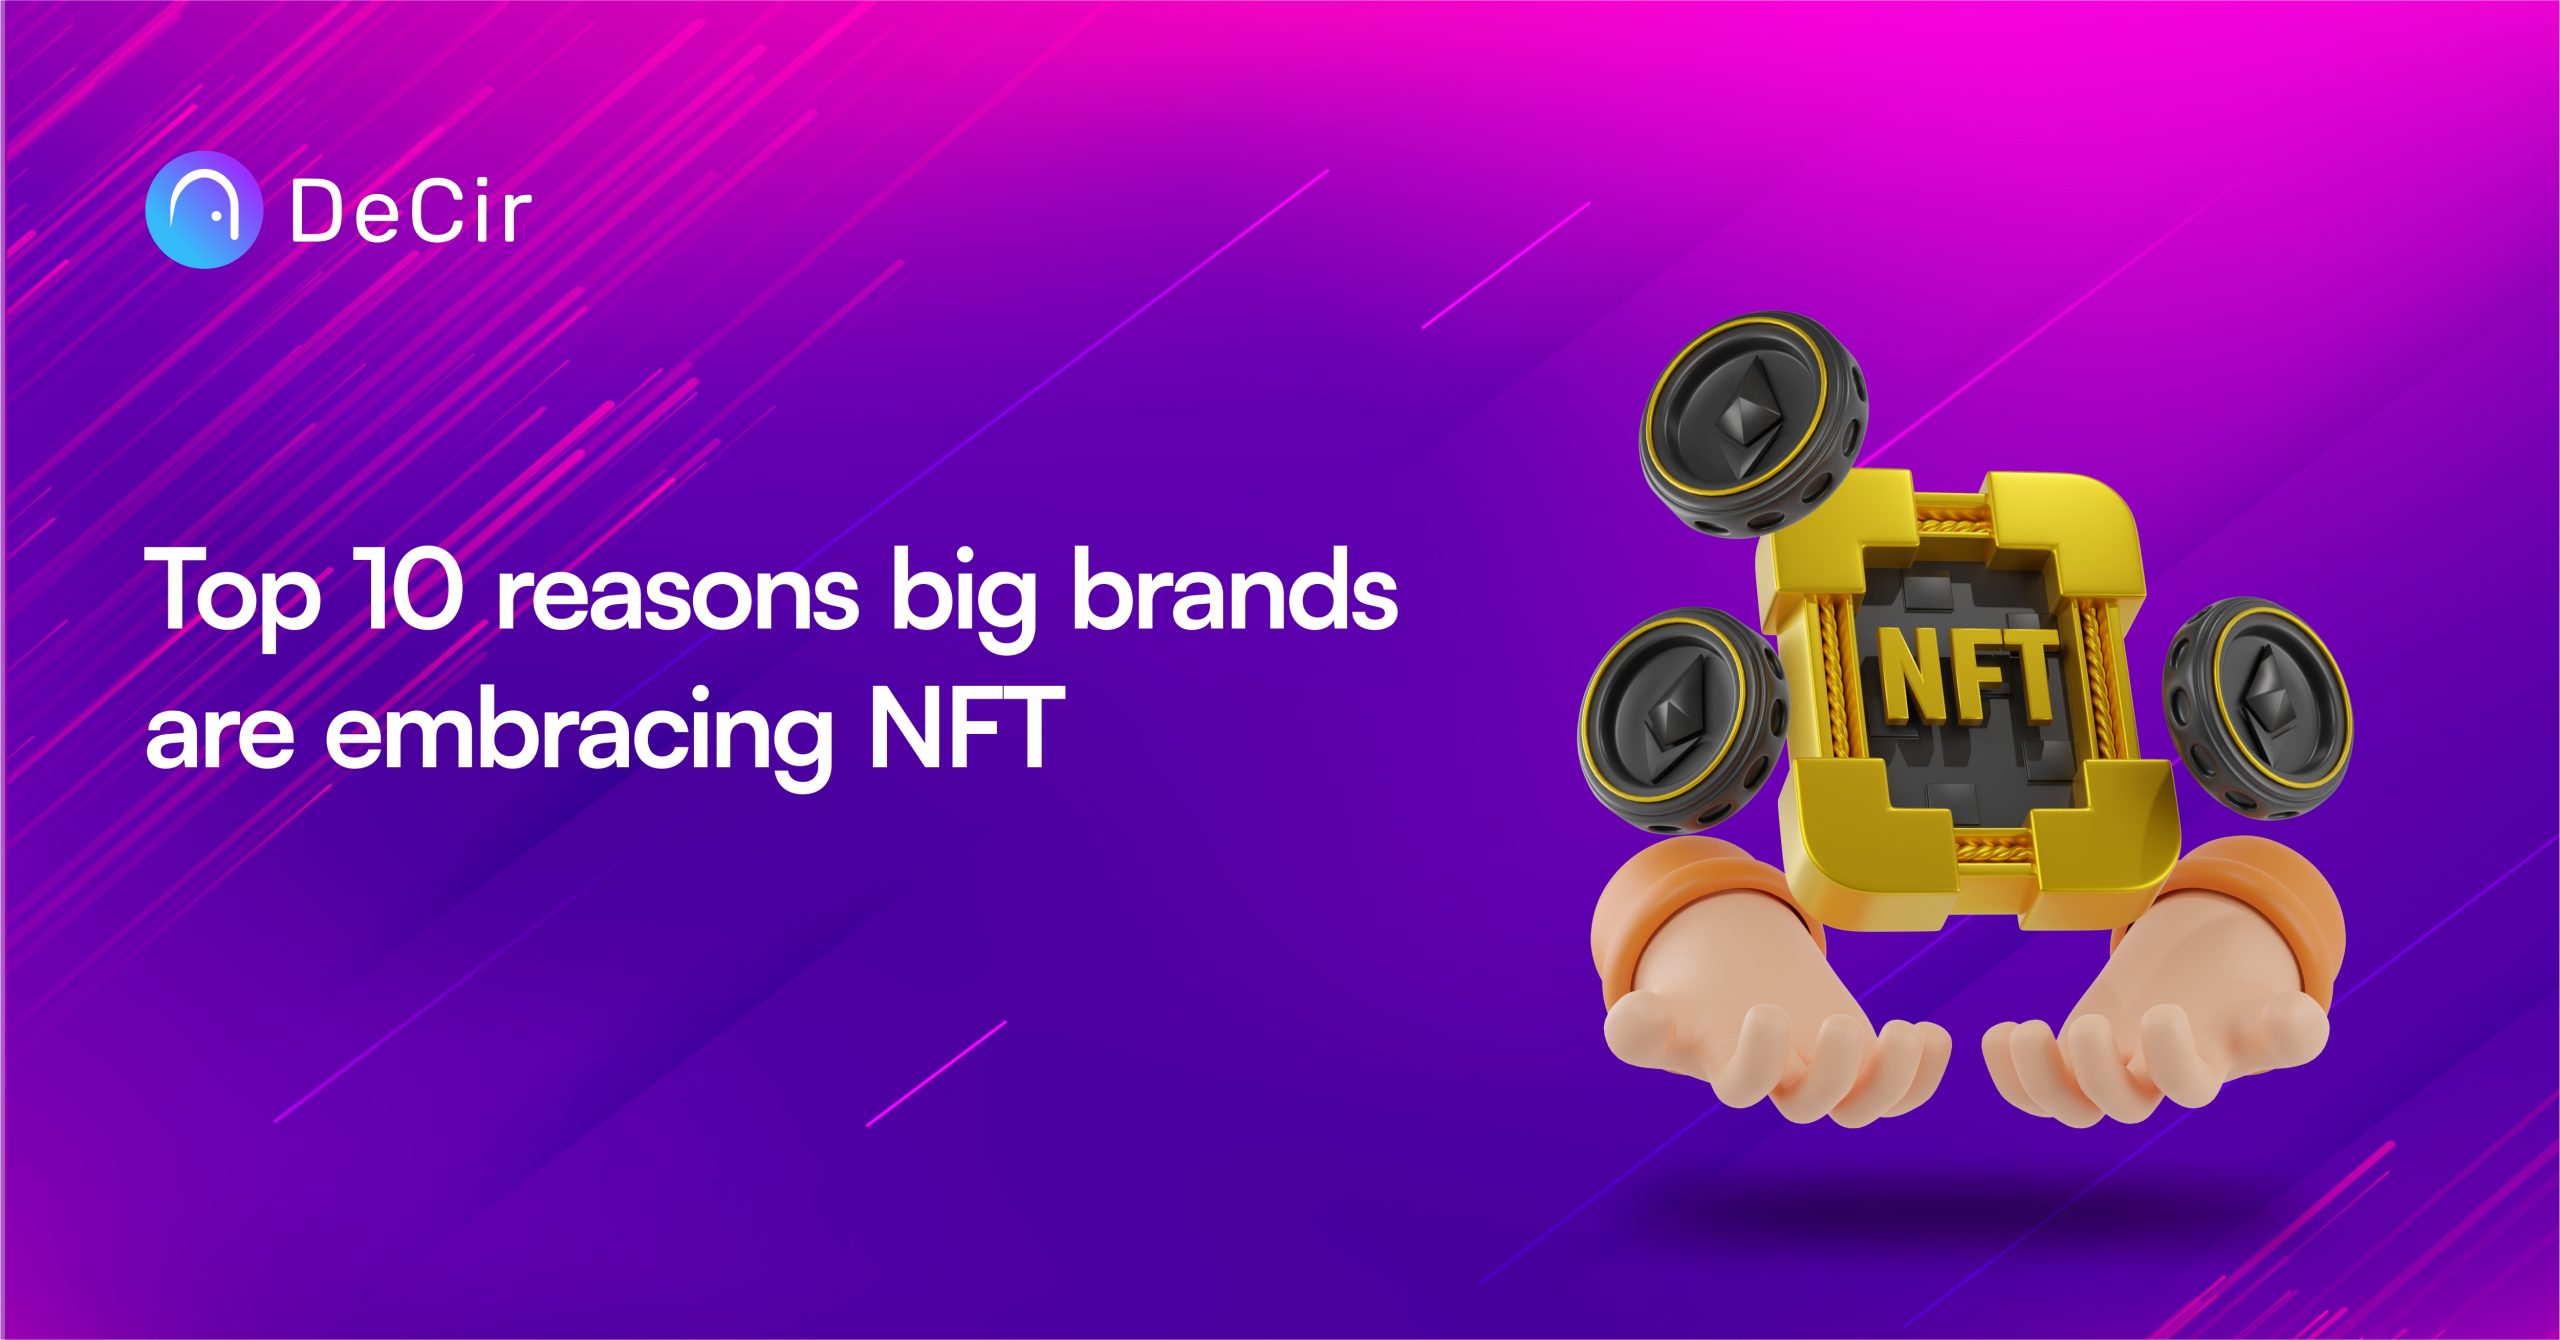 Top 10 reasons big brands are embracing NFT